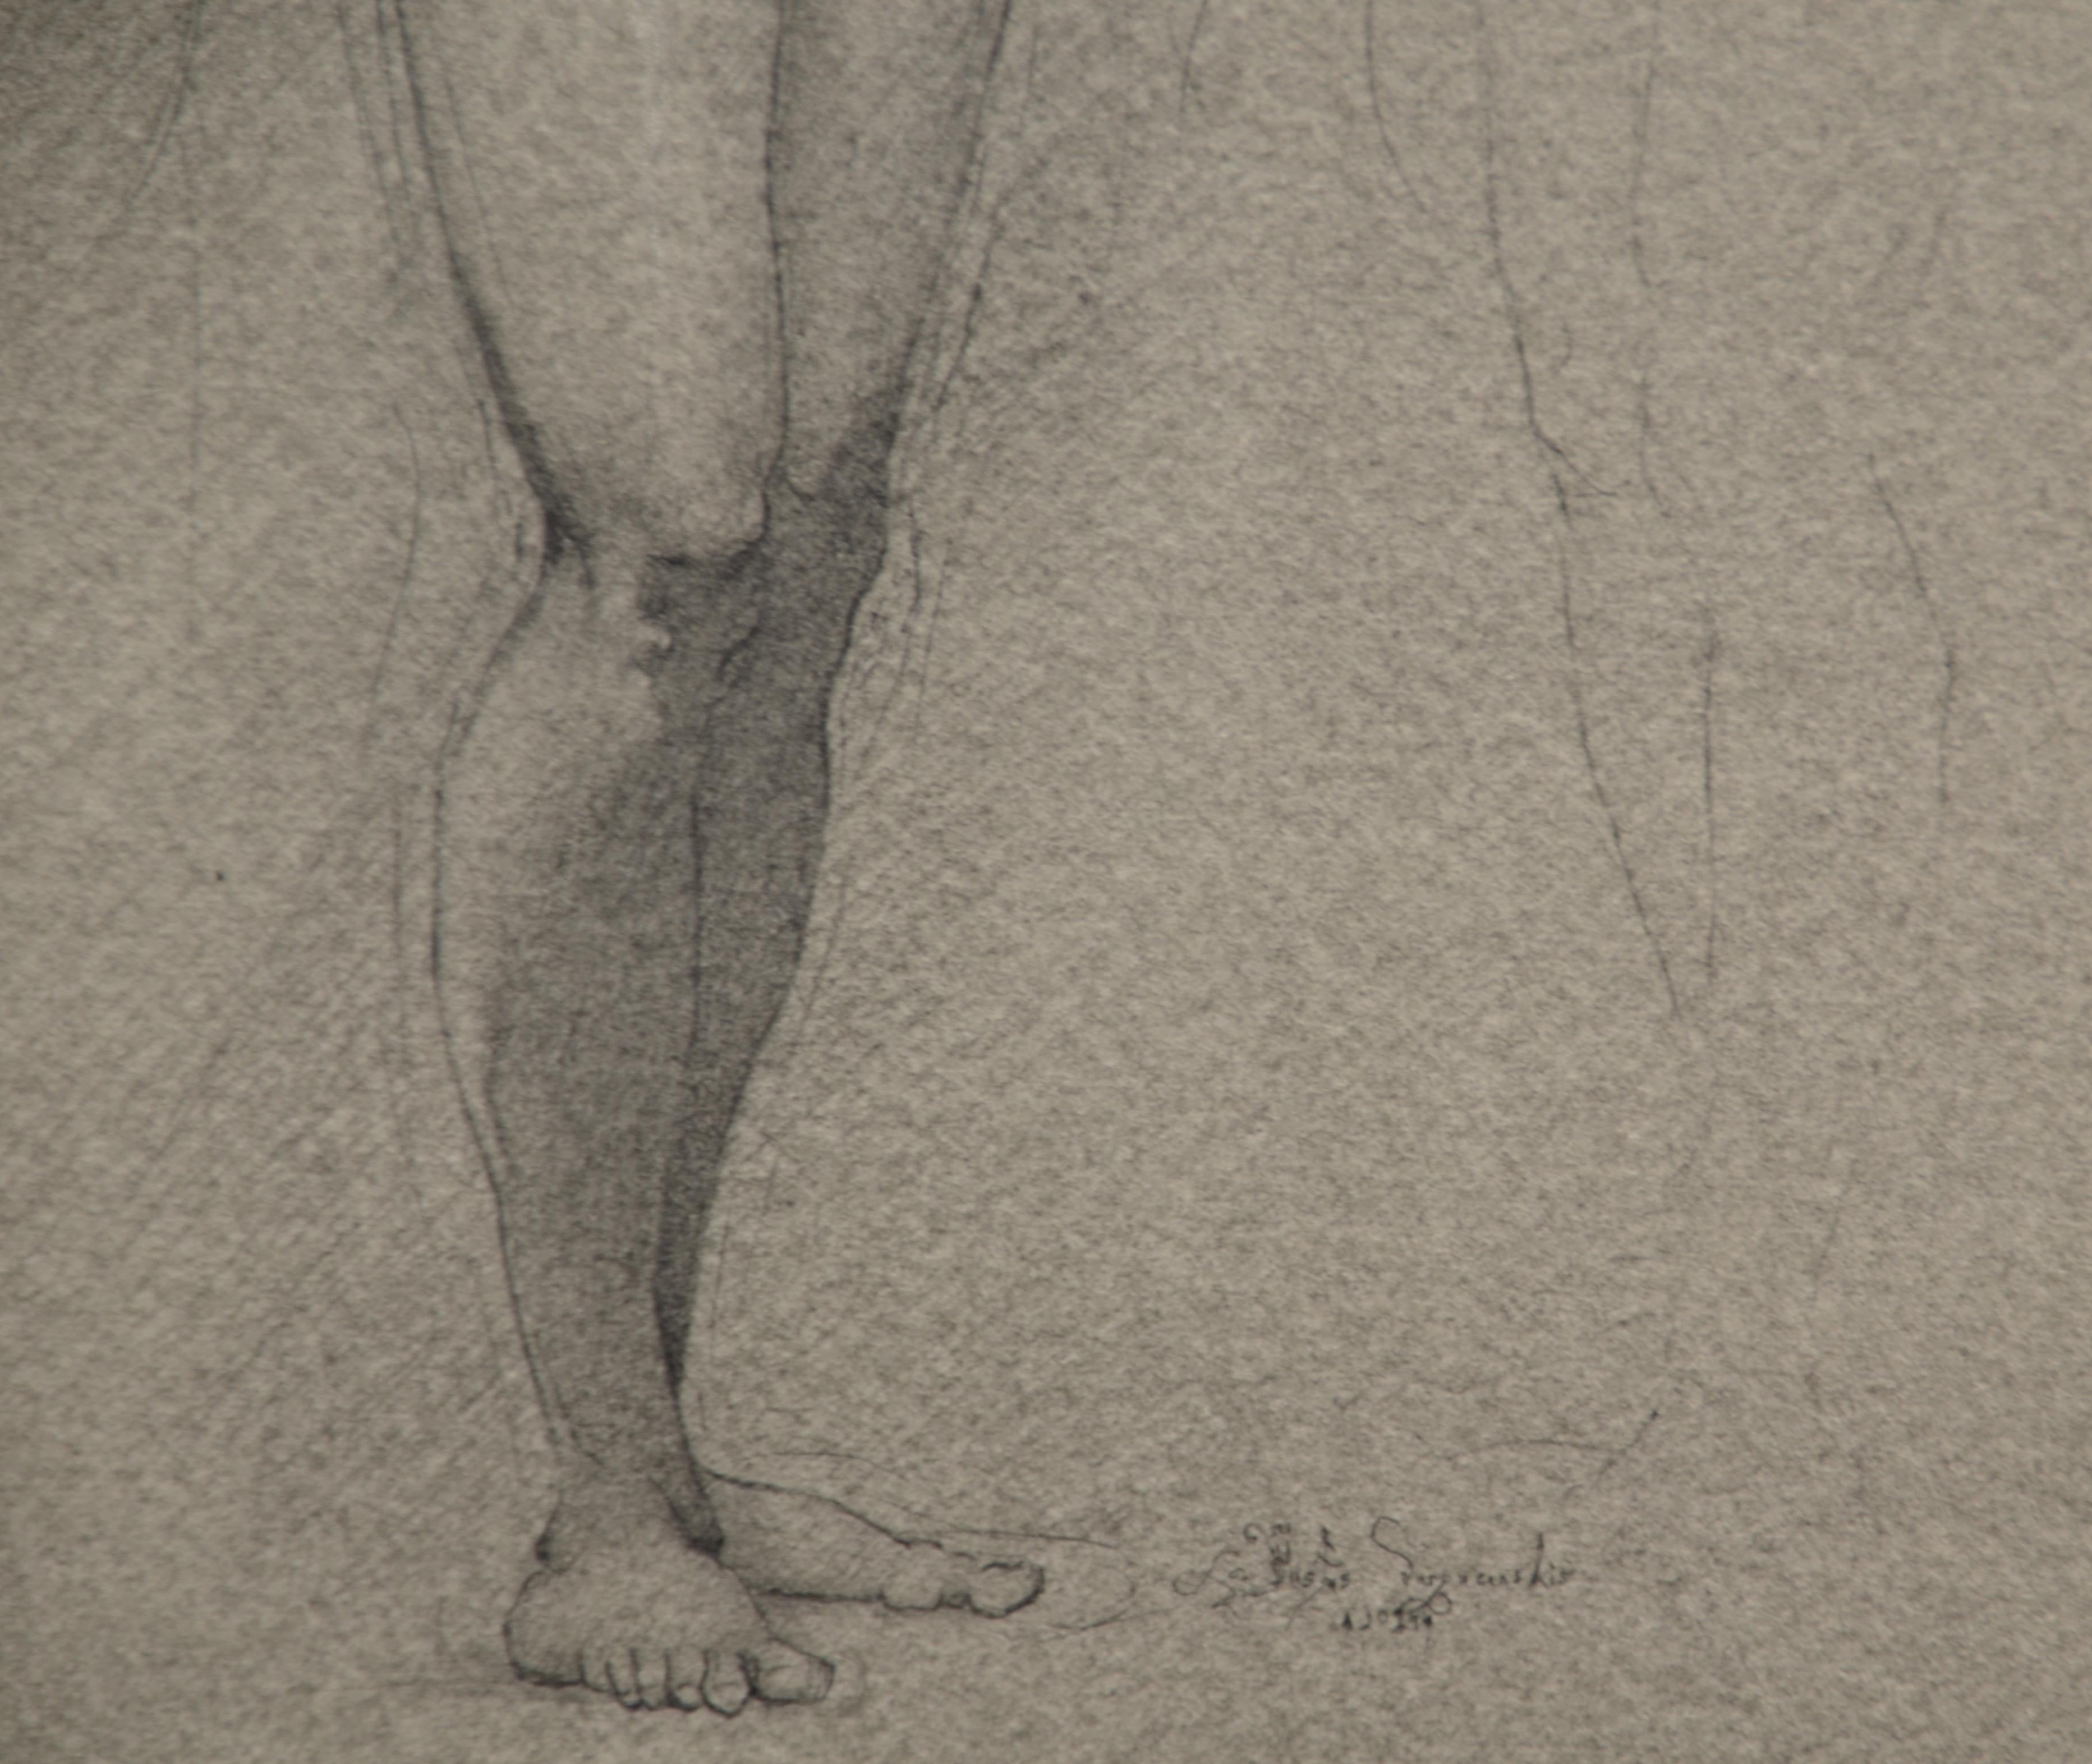 Florentine Figure Drawing, 7x10 inches. Graphite and White Chalk on Toned Paper. Drawing by artist Justas Varpucanskis. This piece utilizes the 